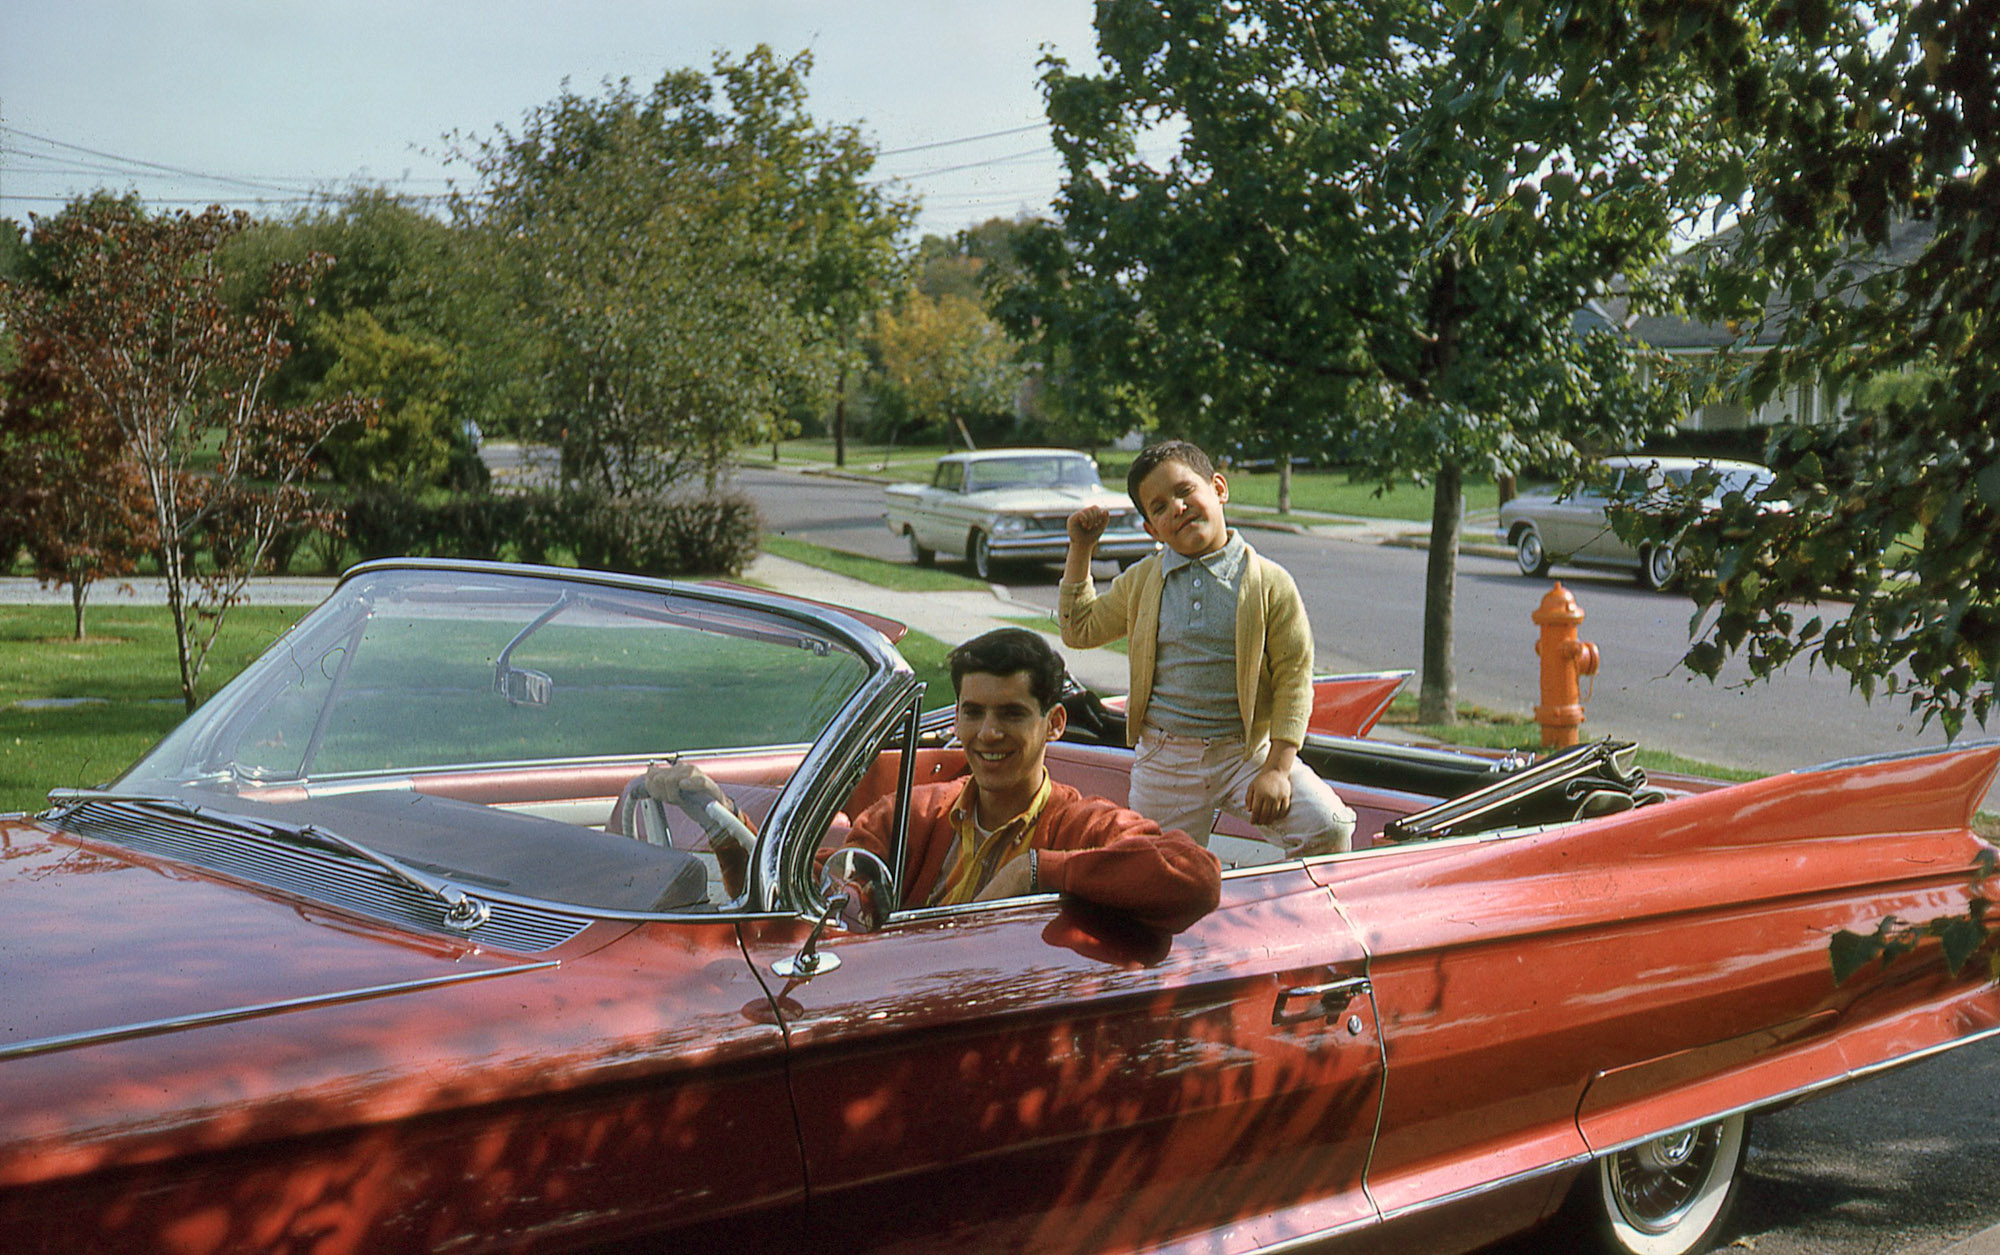 Big brother and little brother pose in Mom's new 1961 Cadillac. Seems big brother did a little damage. View full size.